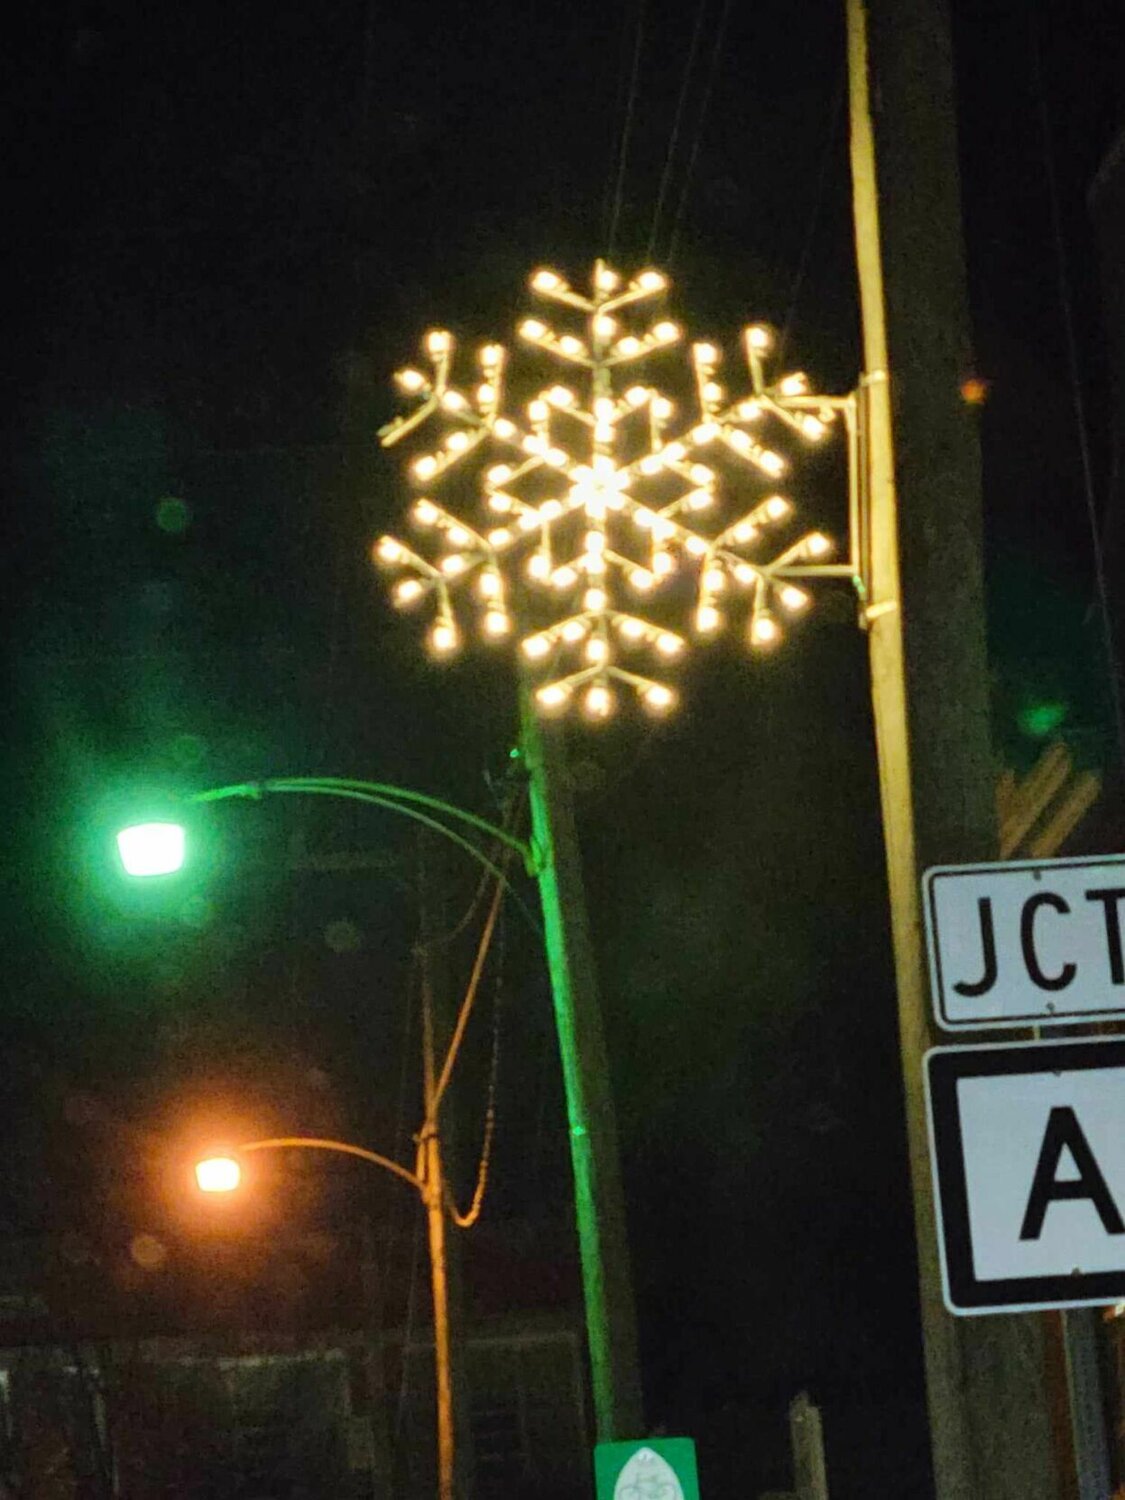 The 74 snowflakes provided by the collaboration of Webster Electric, The City of Marshfield, and the Marshfield Area Chamber of Commerce are lighting the streets of Marshfield while filling everyone with holiday cheer.


Mail Photo by J.T. Jones